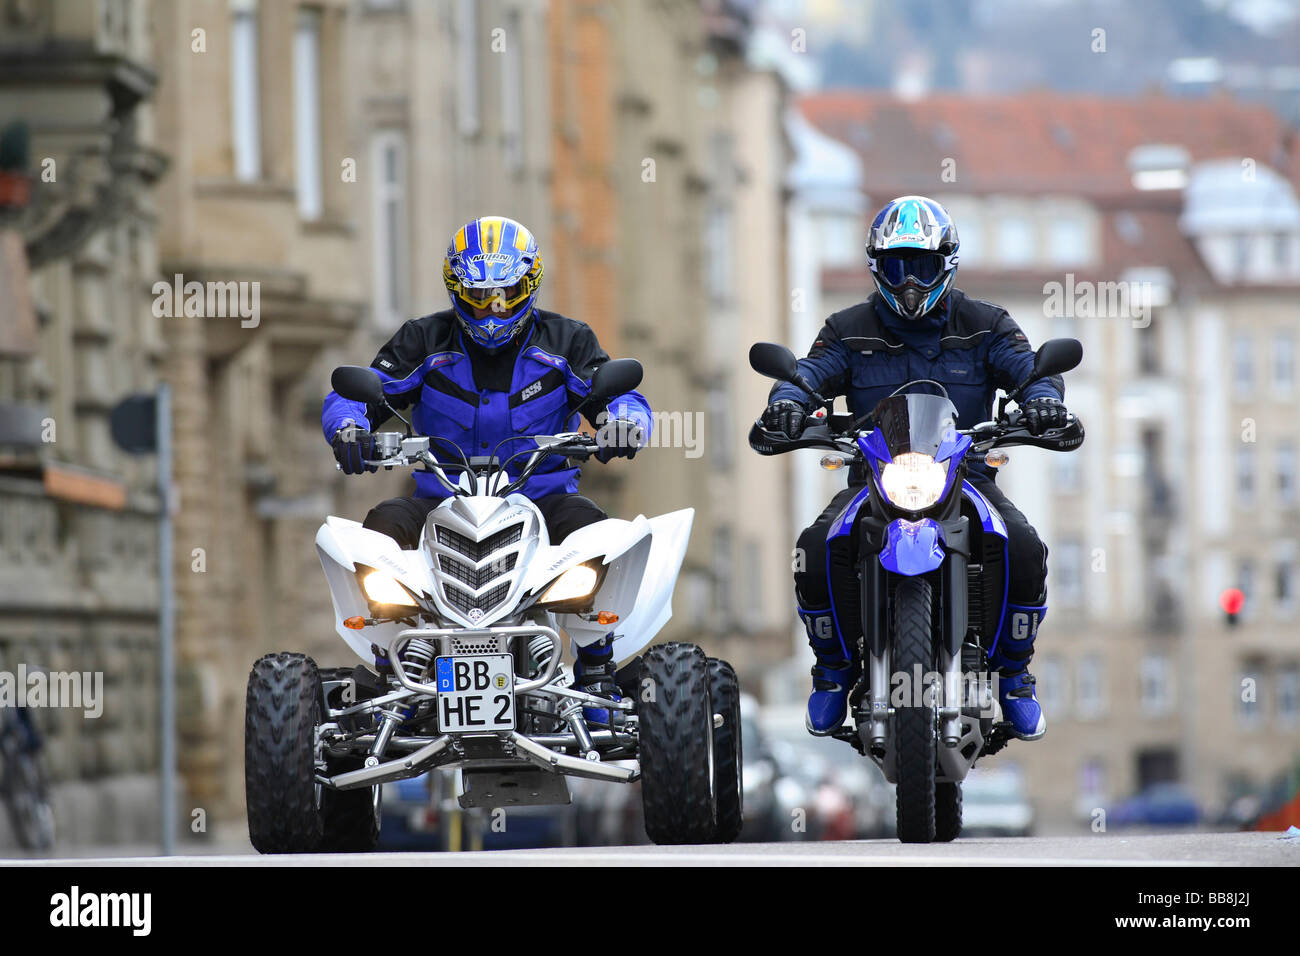 Quad and motorcycle, riding shot Stock Photo